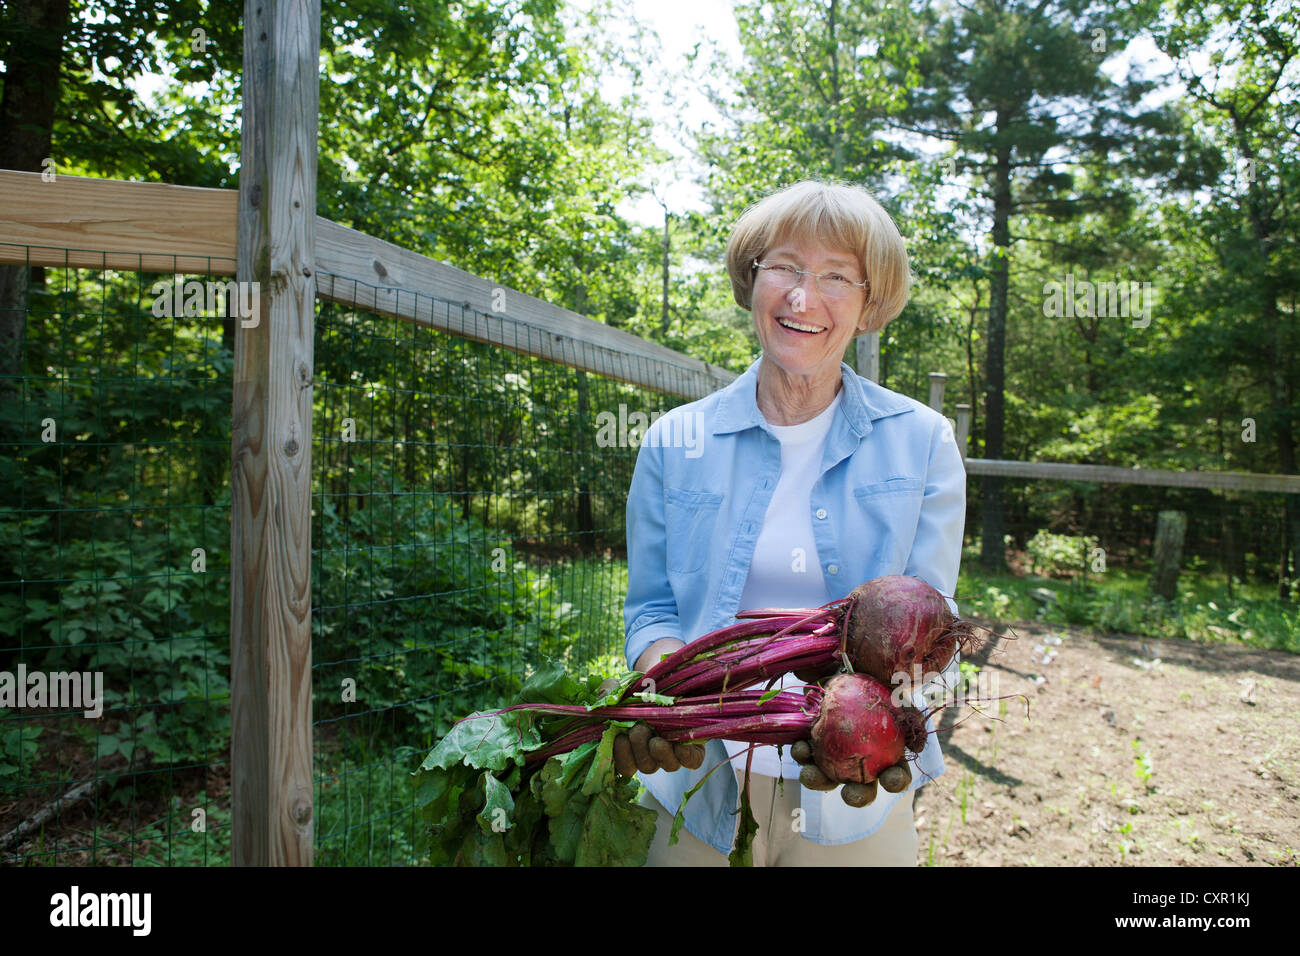 Woman holding beetroot Stock Photo